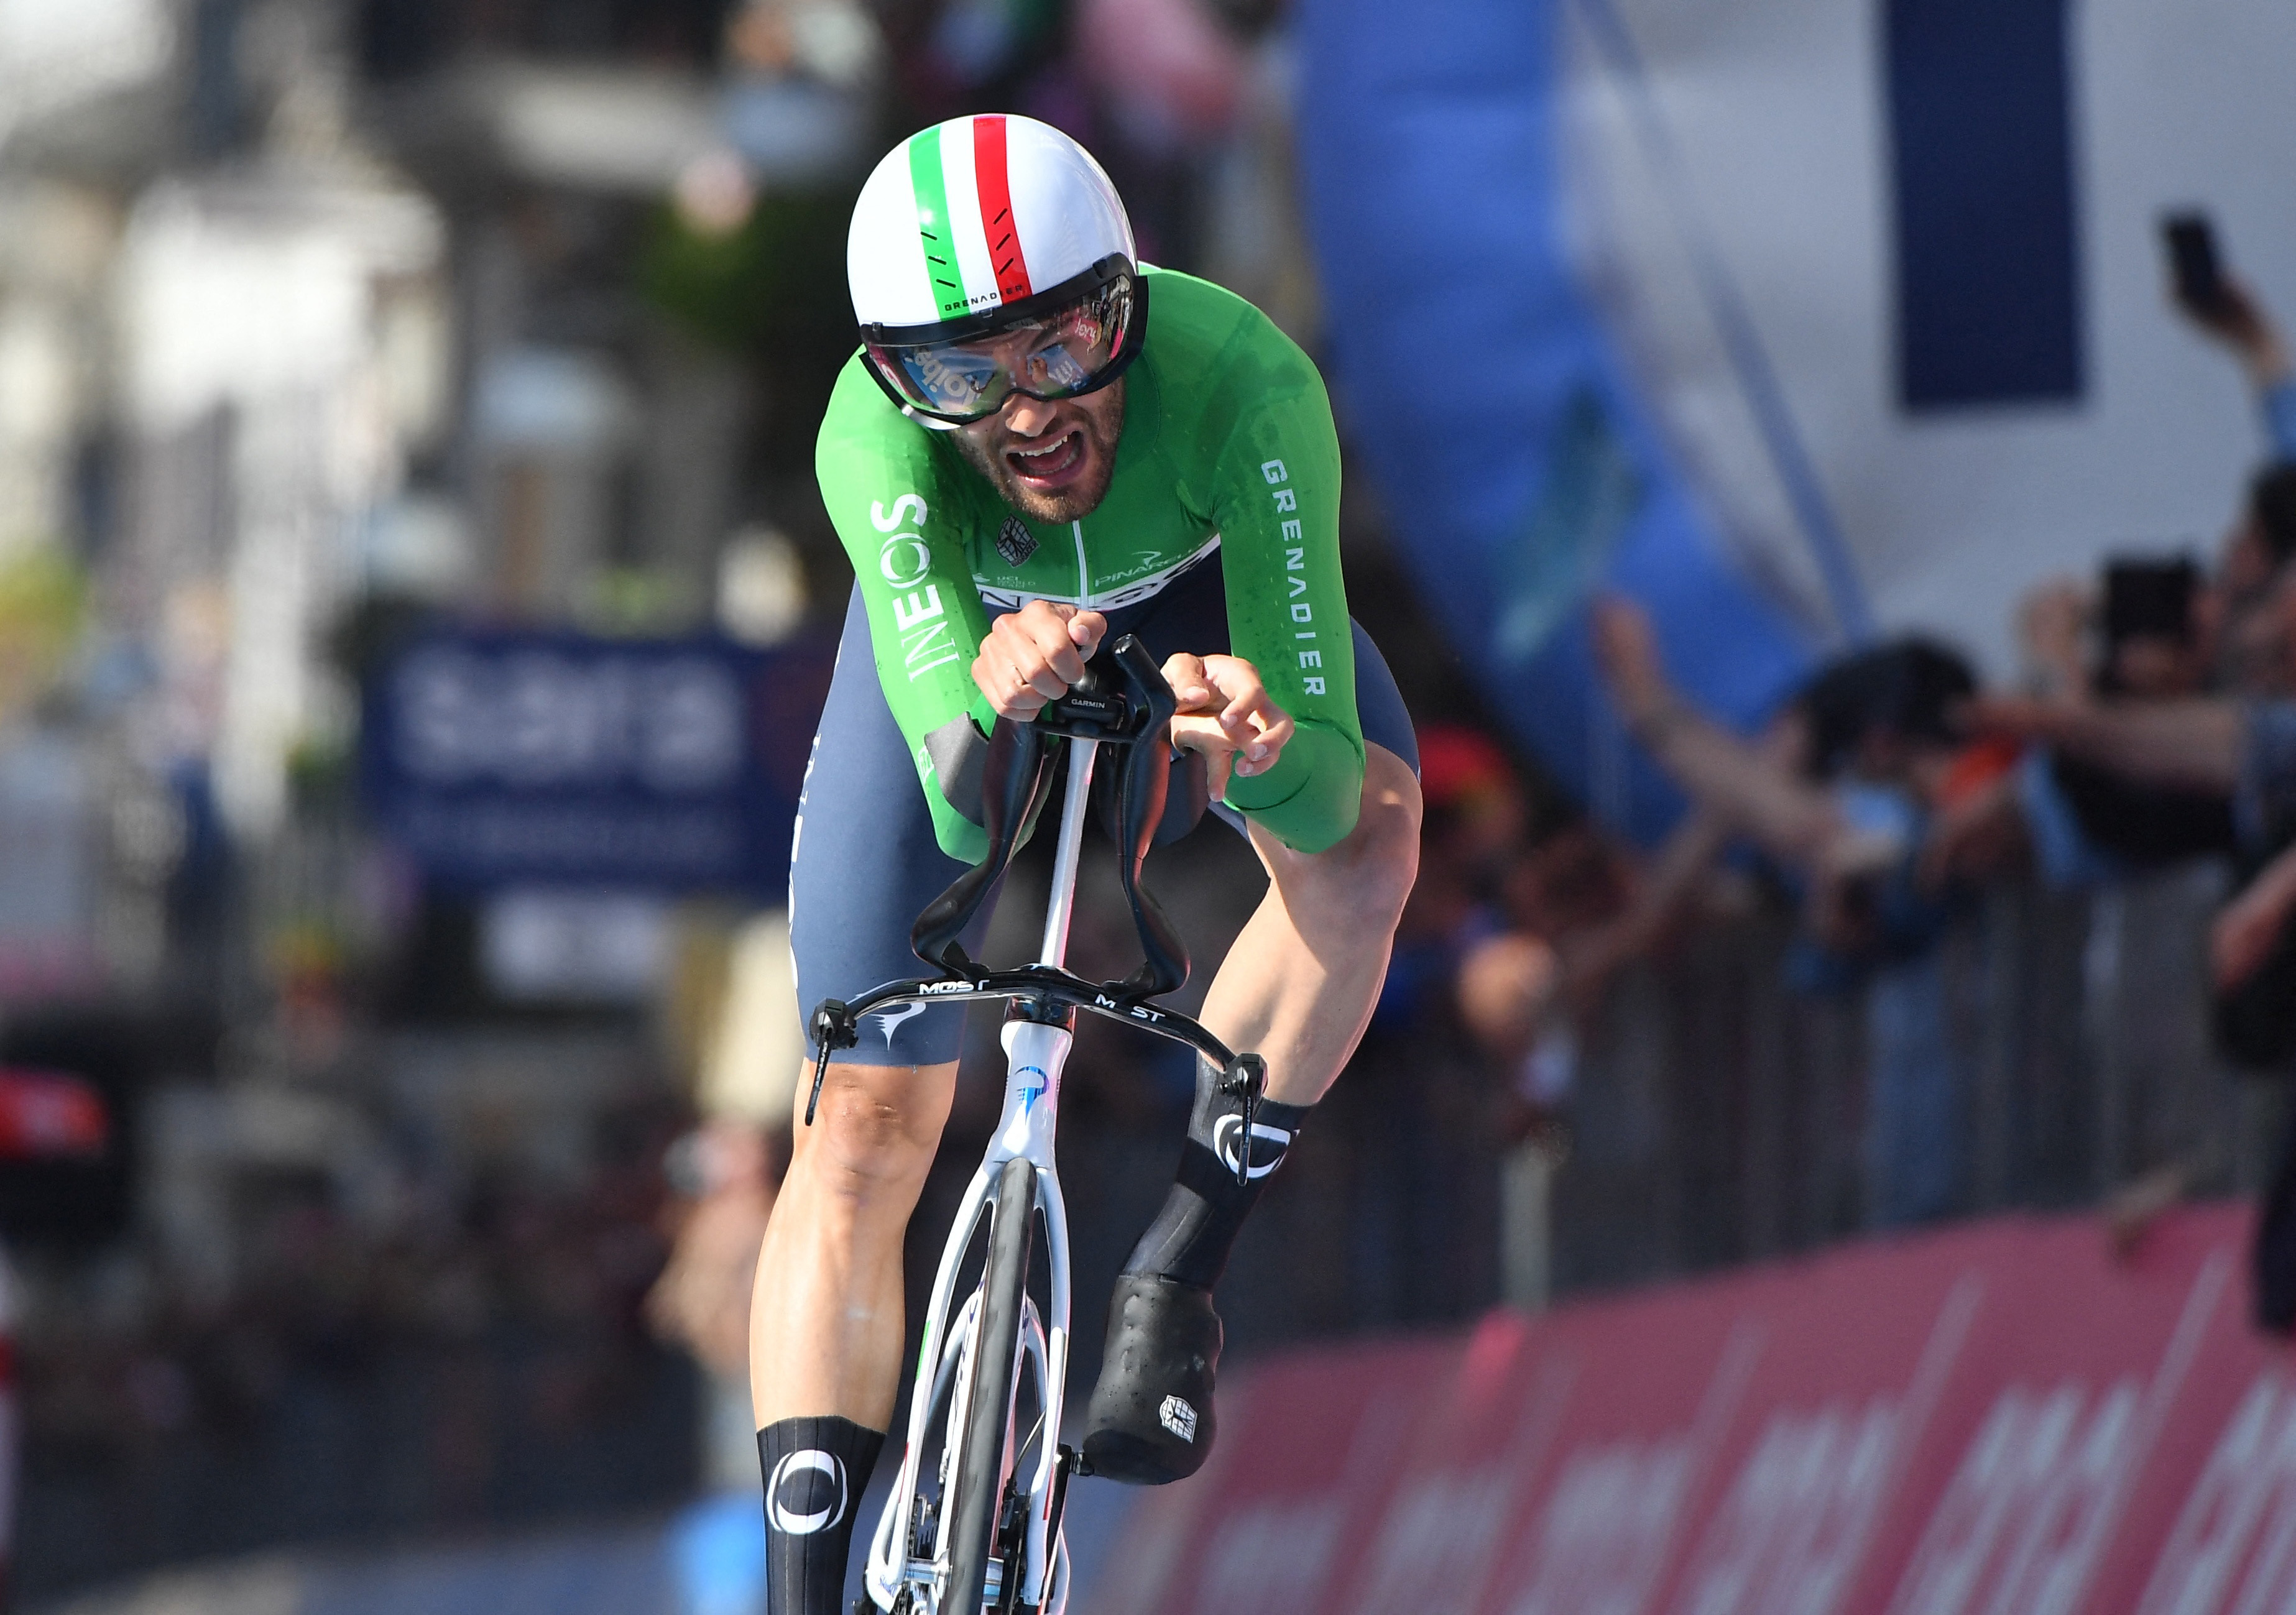 Ganna powers to cycling world one-hour record